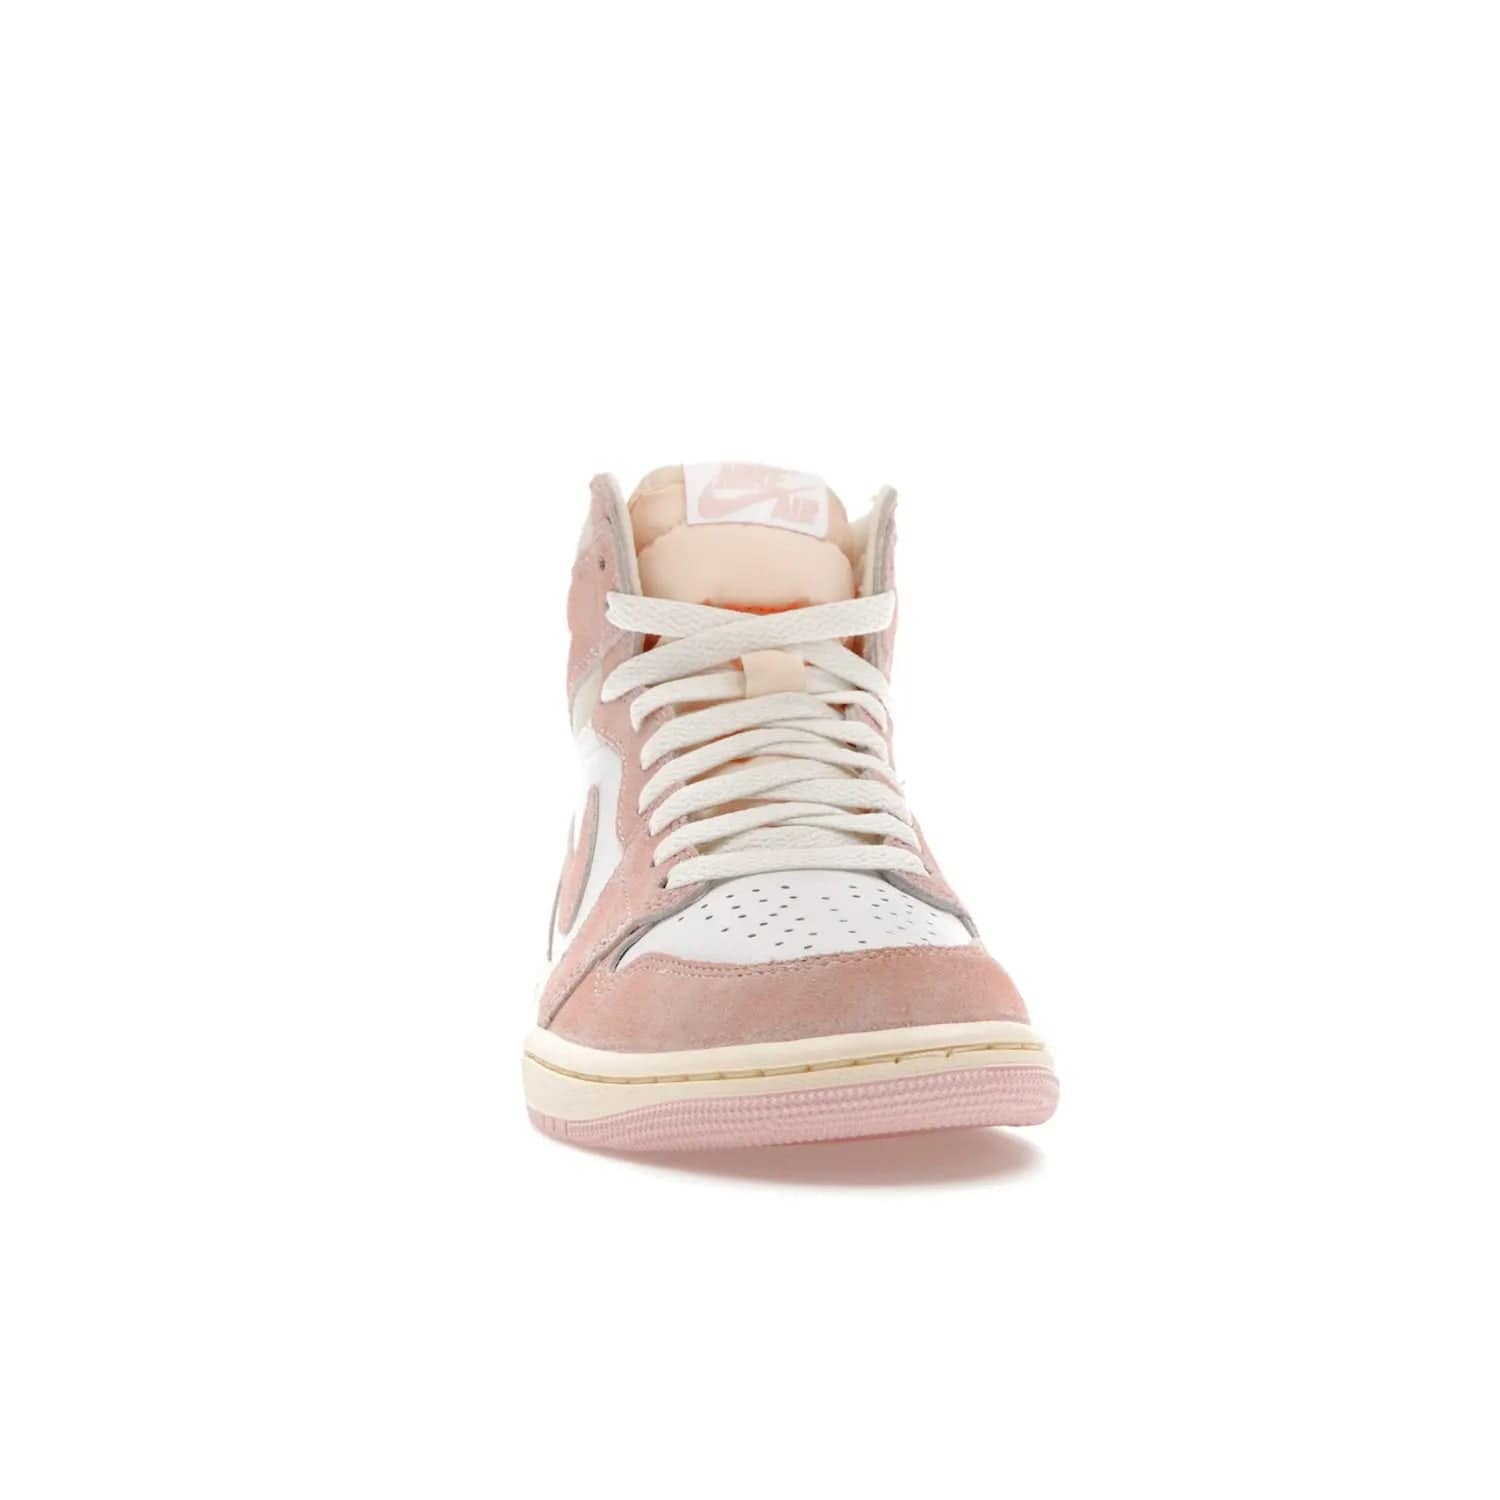 Jordan 1 Retro High OG Washed Pink (Women's) - Image 9 - Only at www.BallersClubKickz.com - Iconic Air Jordan 1 Retro High OG for women with unique pink suede and white leather uppers. Get the timeless look on April 22, 2023.